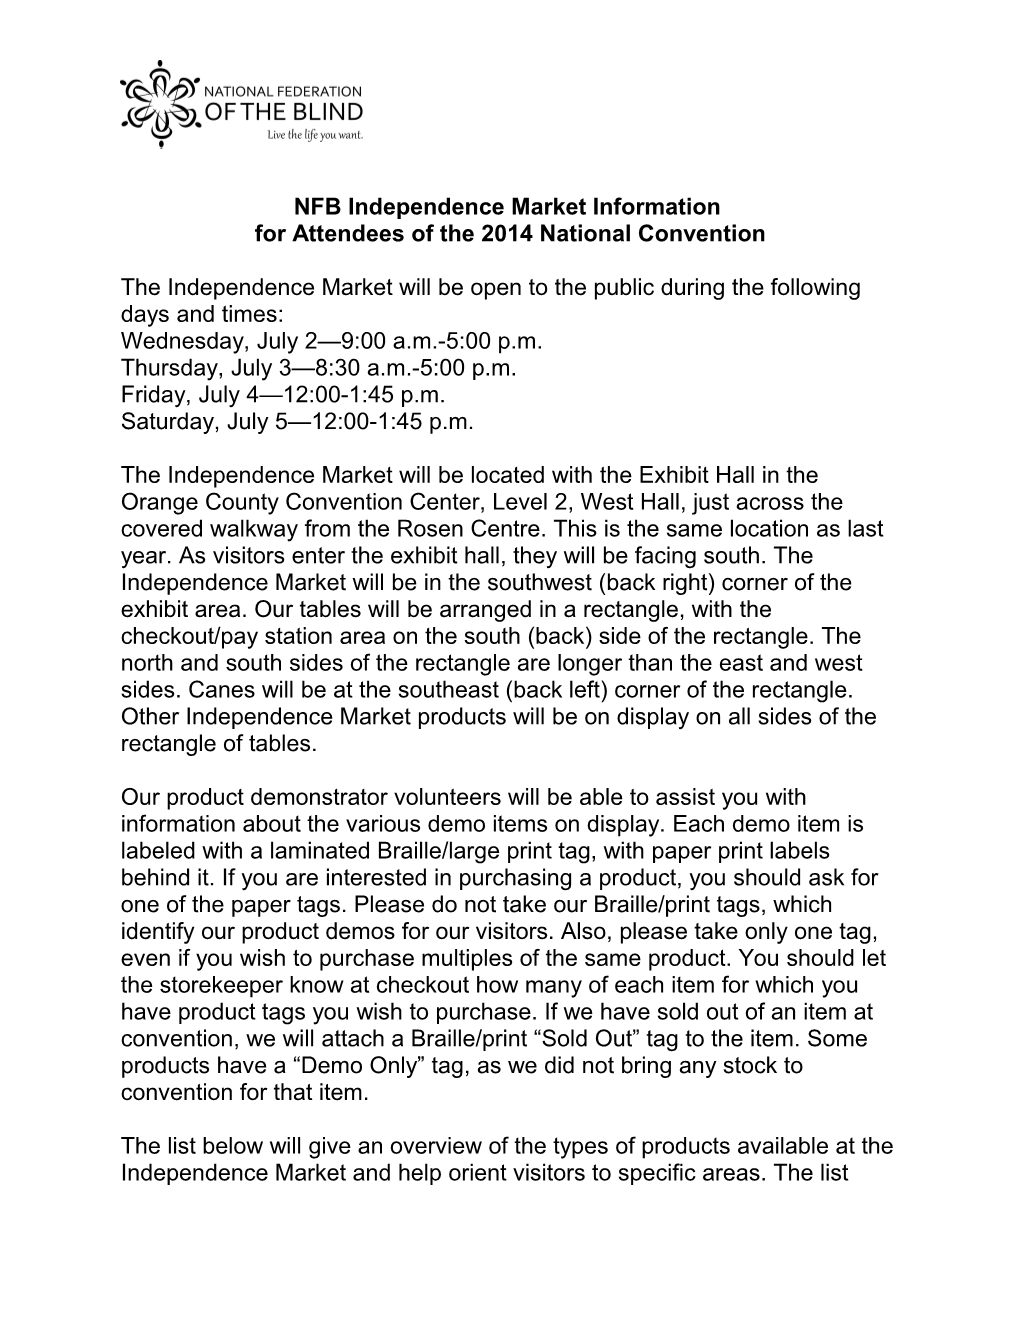 NFB Independence Market Information for Attendees of the 2014 National Convention